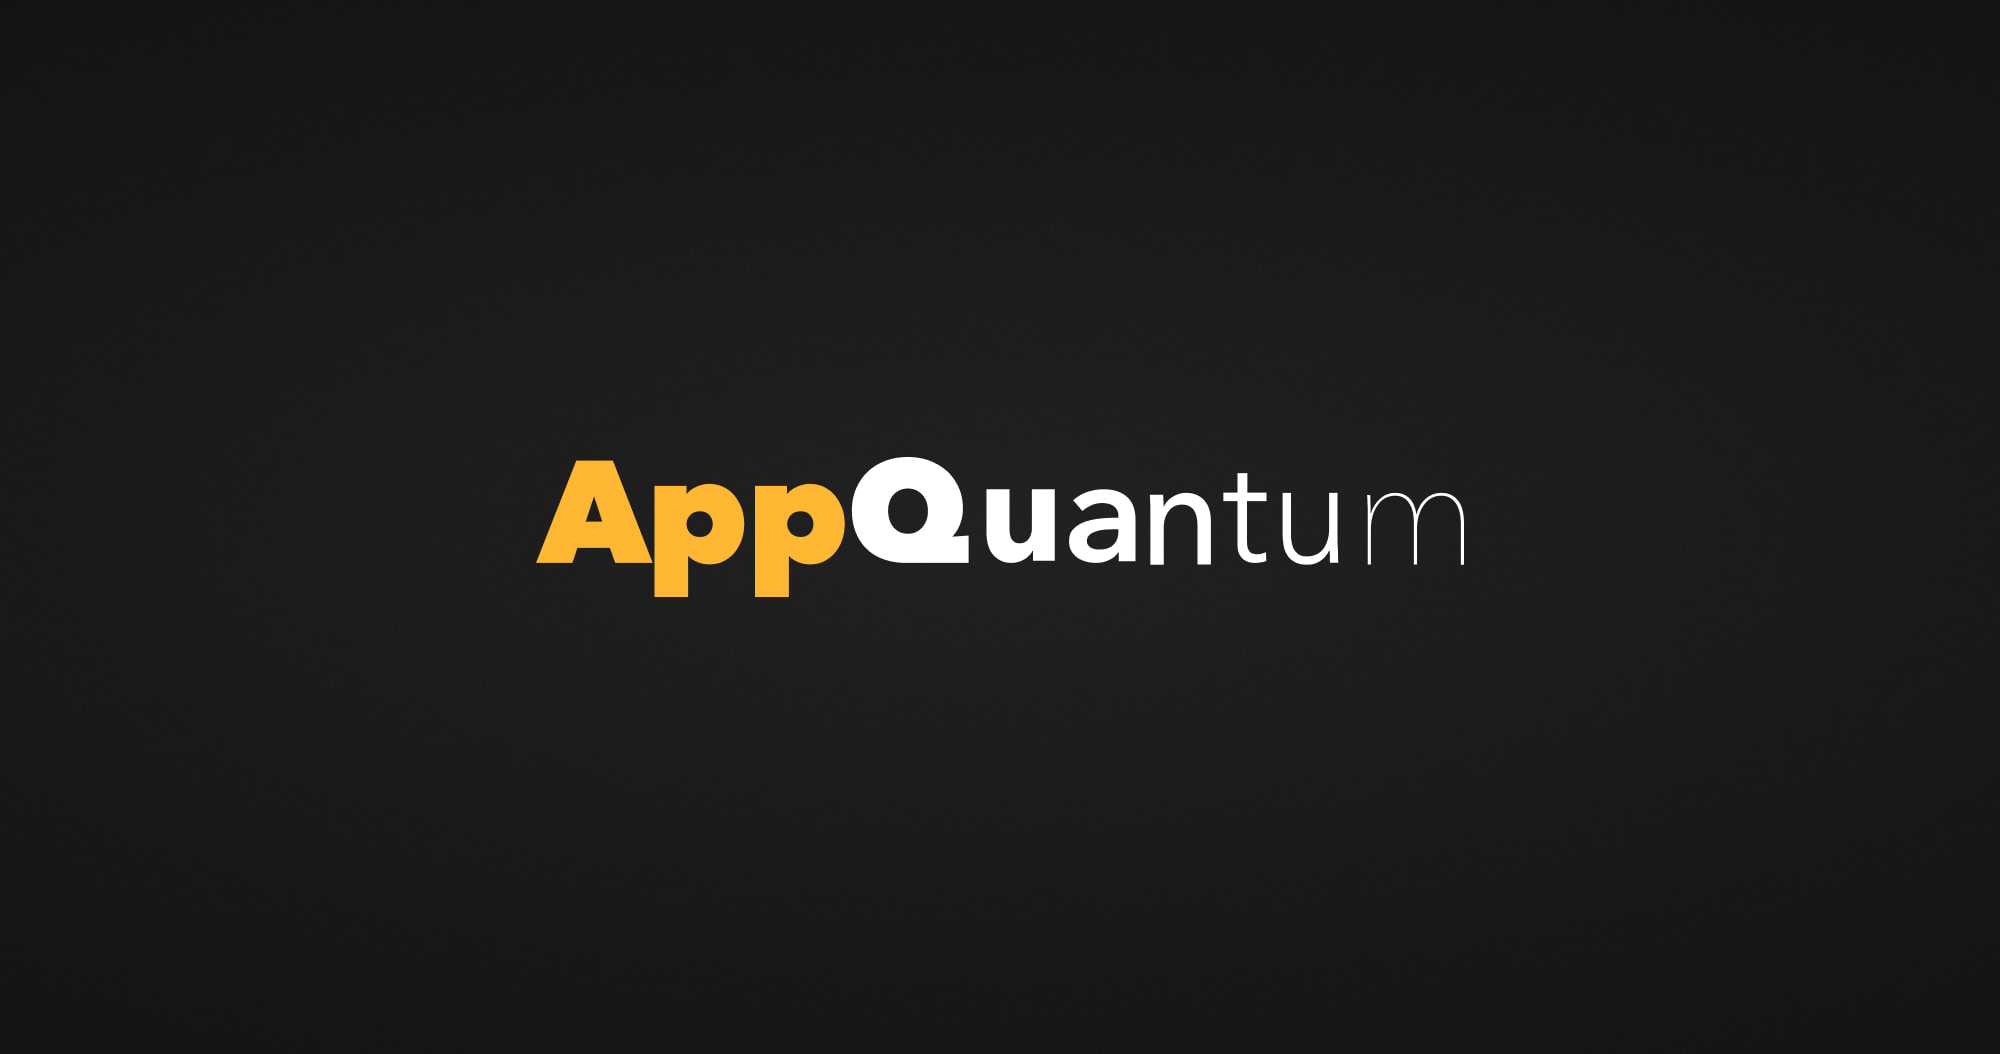 AppQuantum Opens New Offices and Relocates Its Employees and Contractors Who Lived in Russia